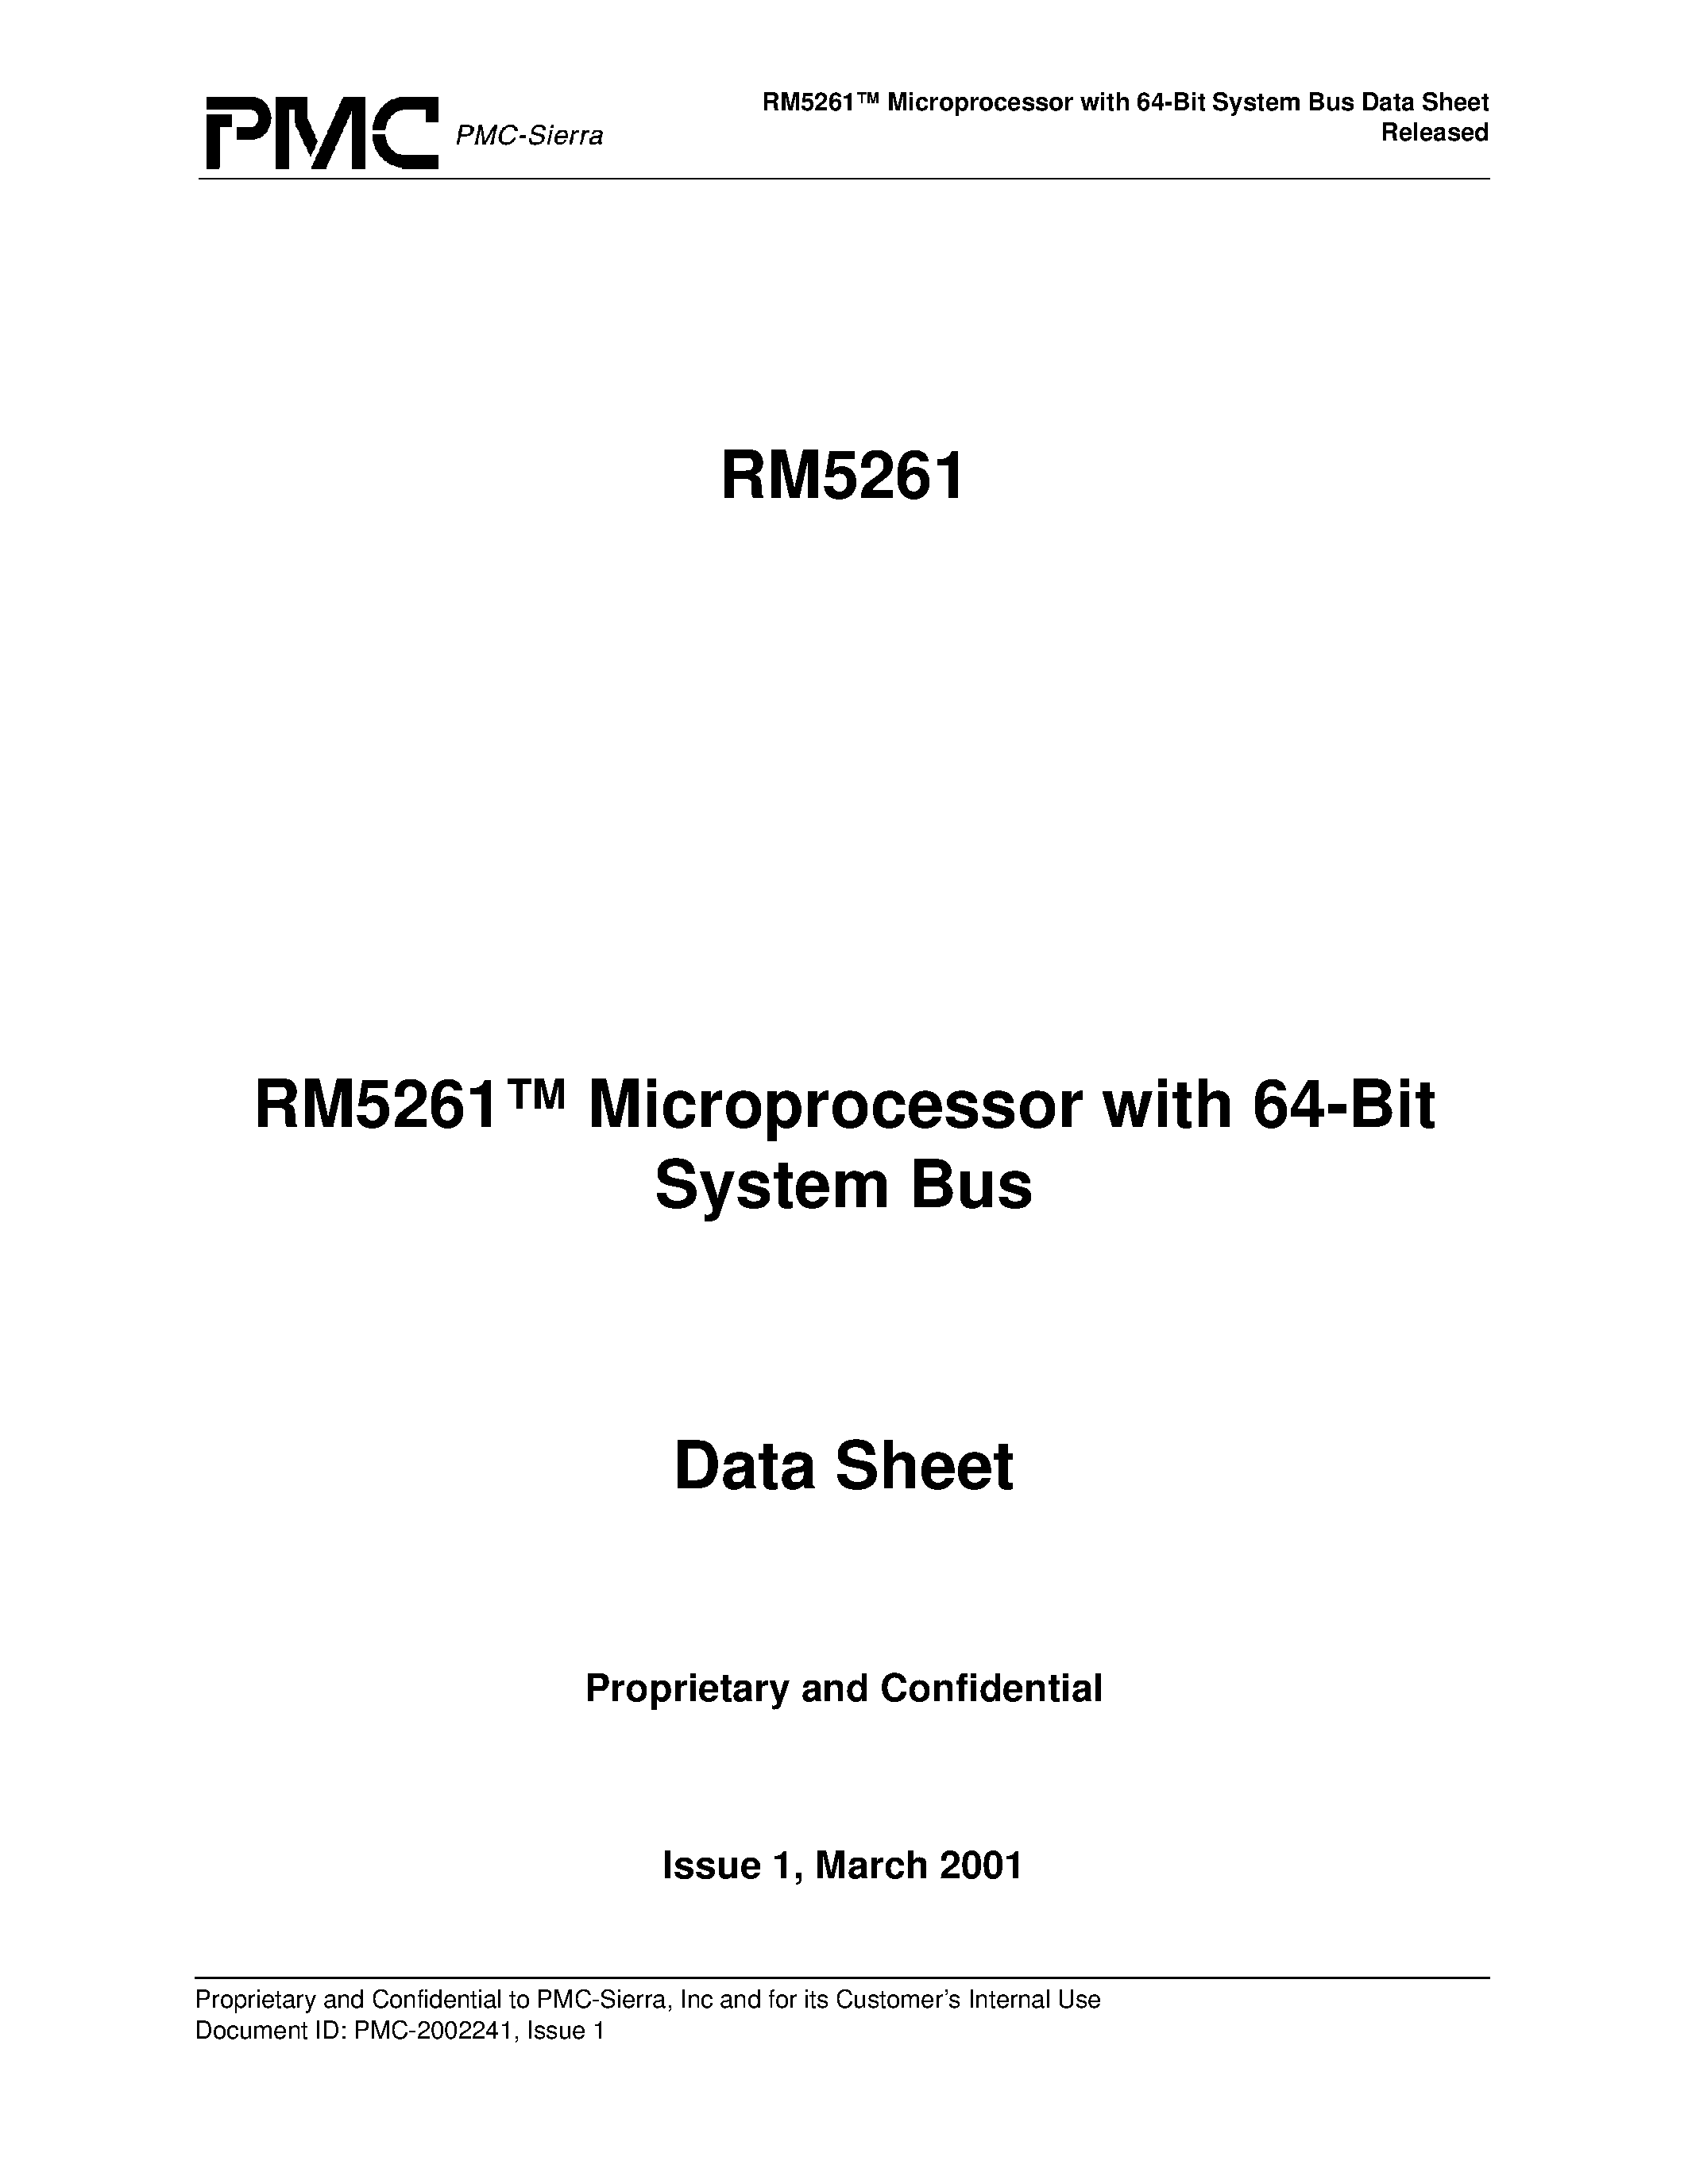 Даташит RM5261-266-Q - RM5261 Microprocessor with 64-Bit System Bus Data Sheet Released страница 1